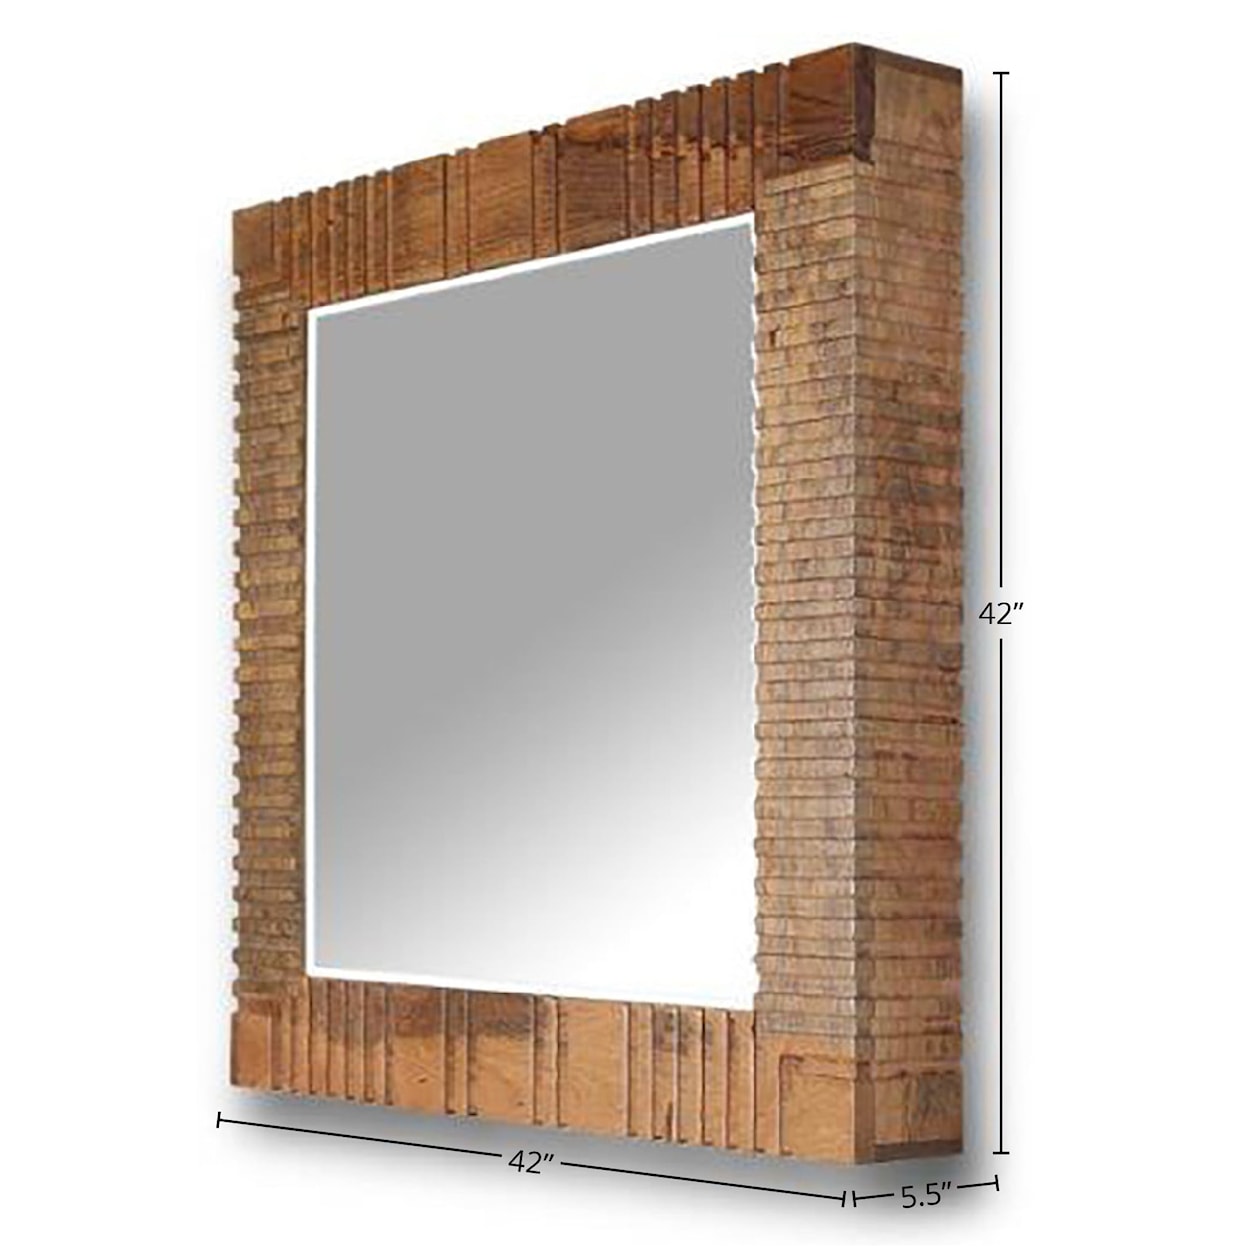 Parker House Crossings Downtown Wall Mirror